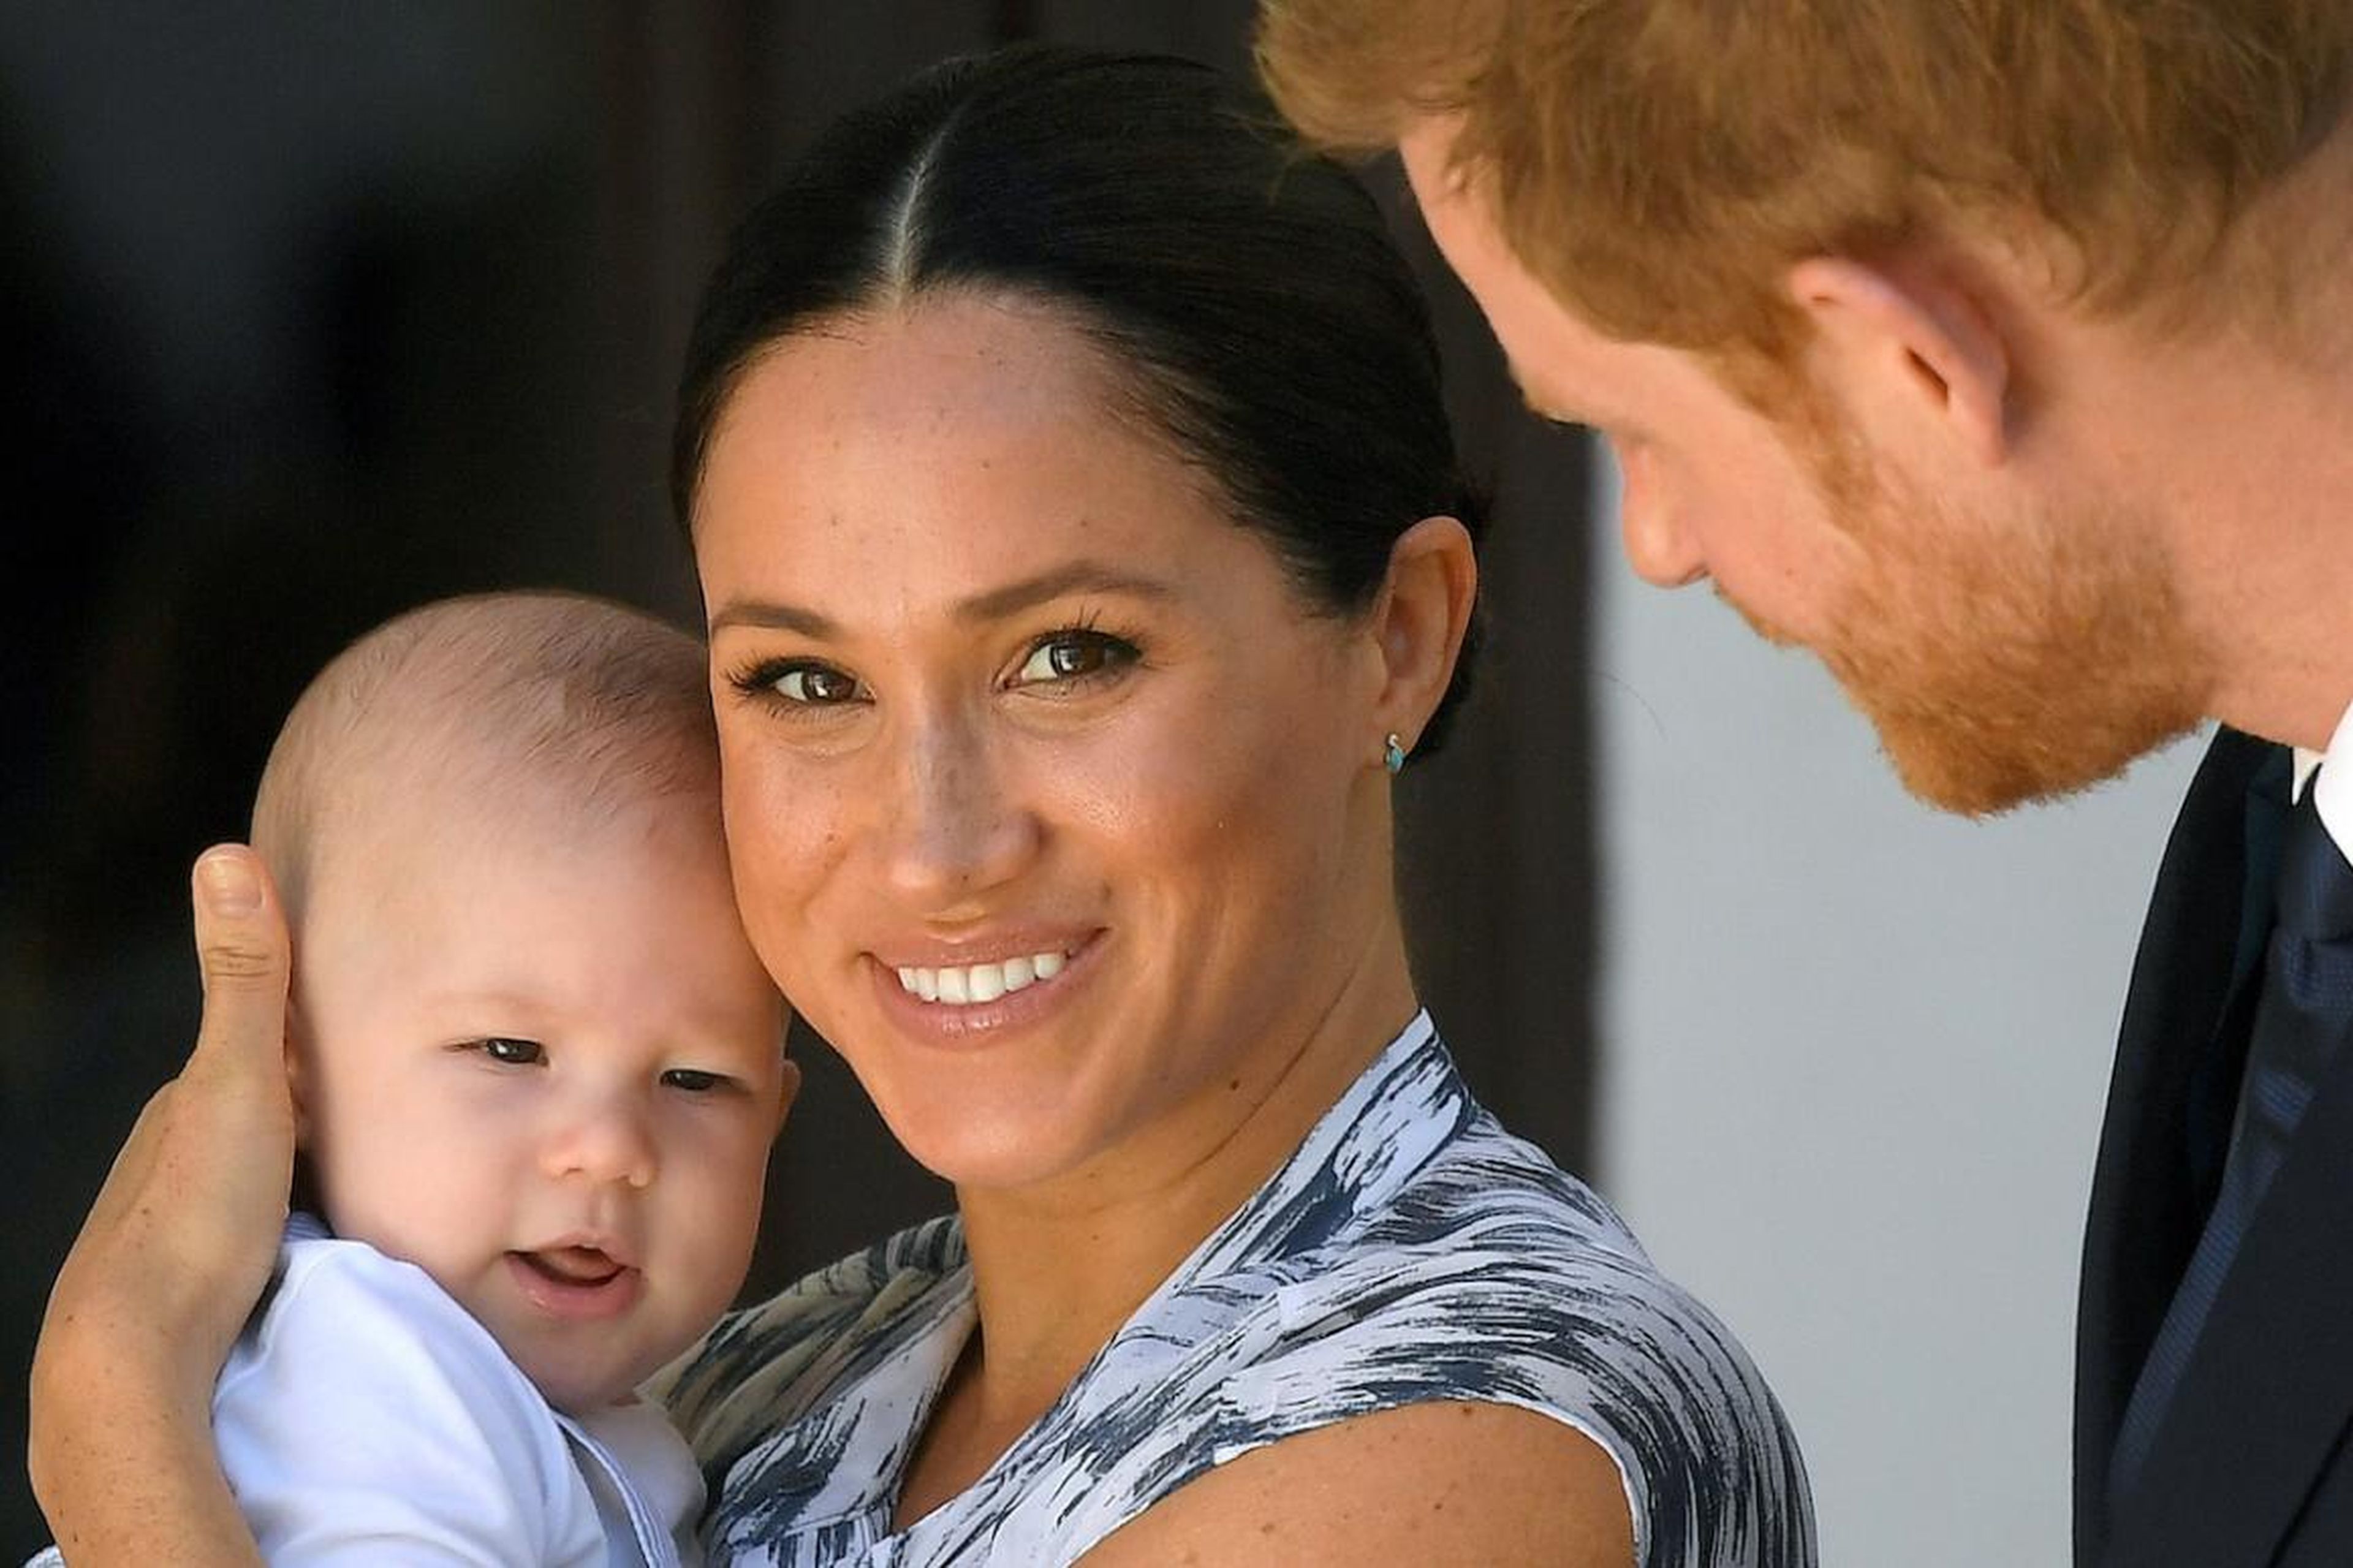 Britain's Prince Harry and his wife Meghan, Duchess of Sussex, holding their son Archie, meet Archbishop Desmond Tutu (not pictured) at the Desmond & Leah Tutu Legacy Foundation in Cape Town, South Africa, in September.